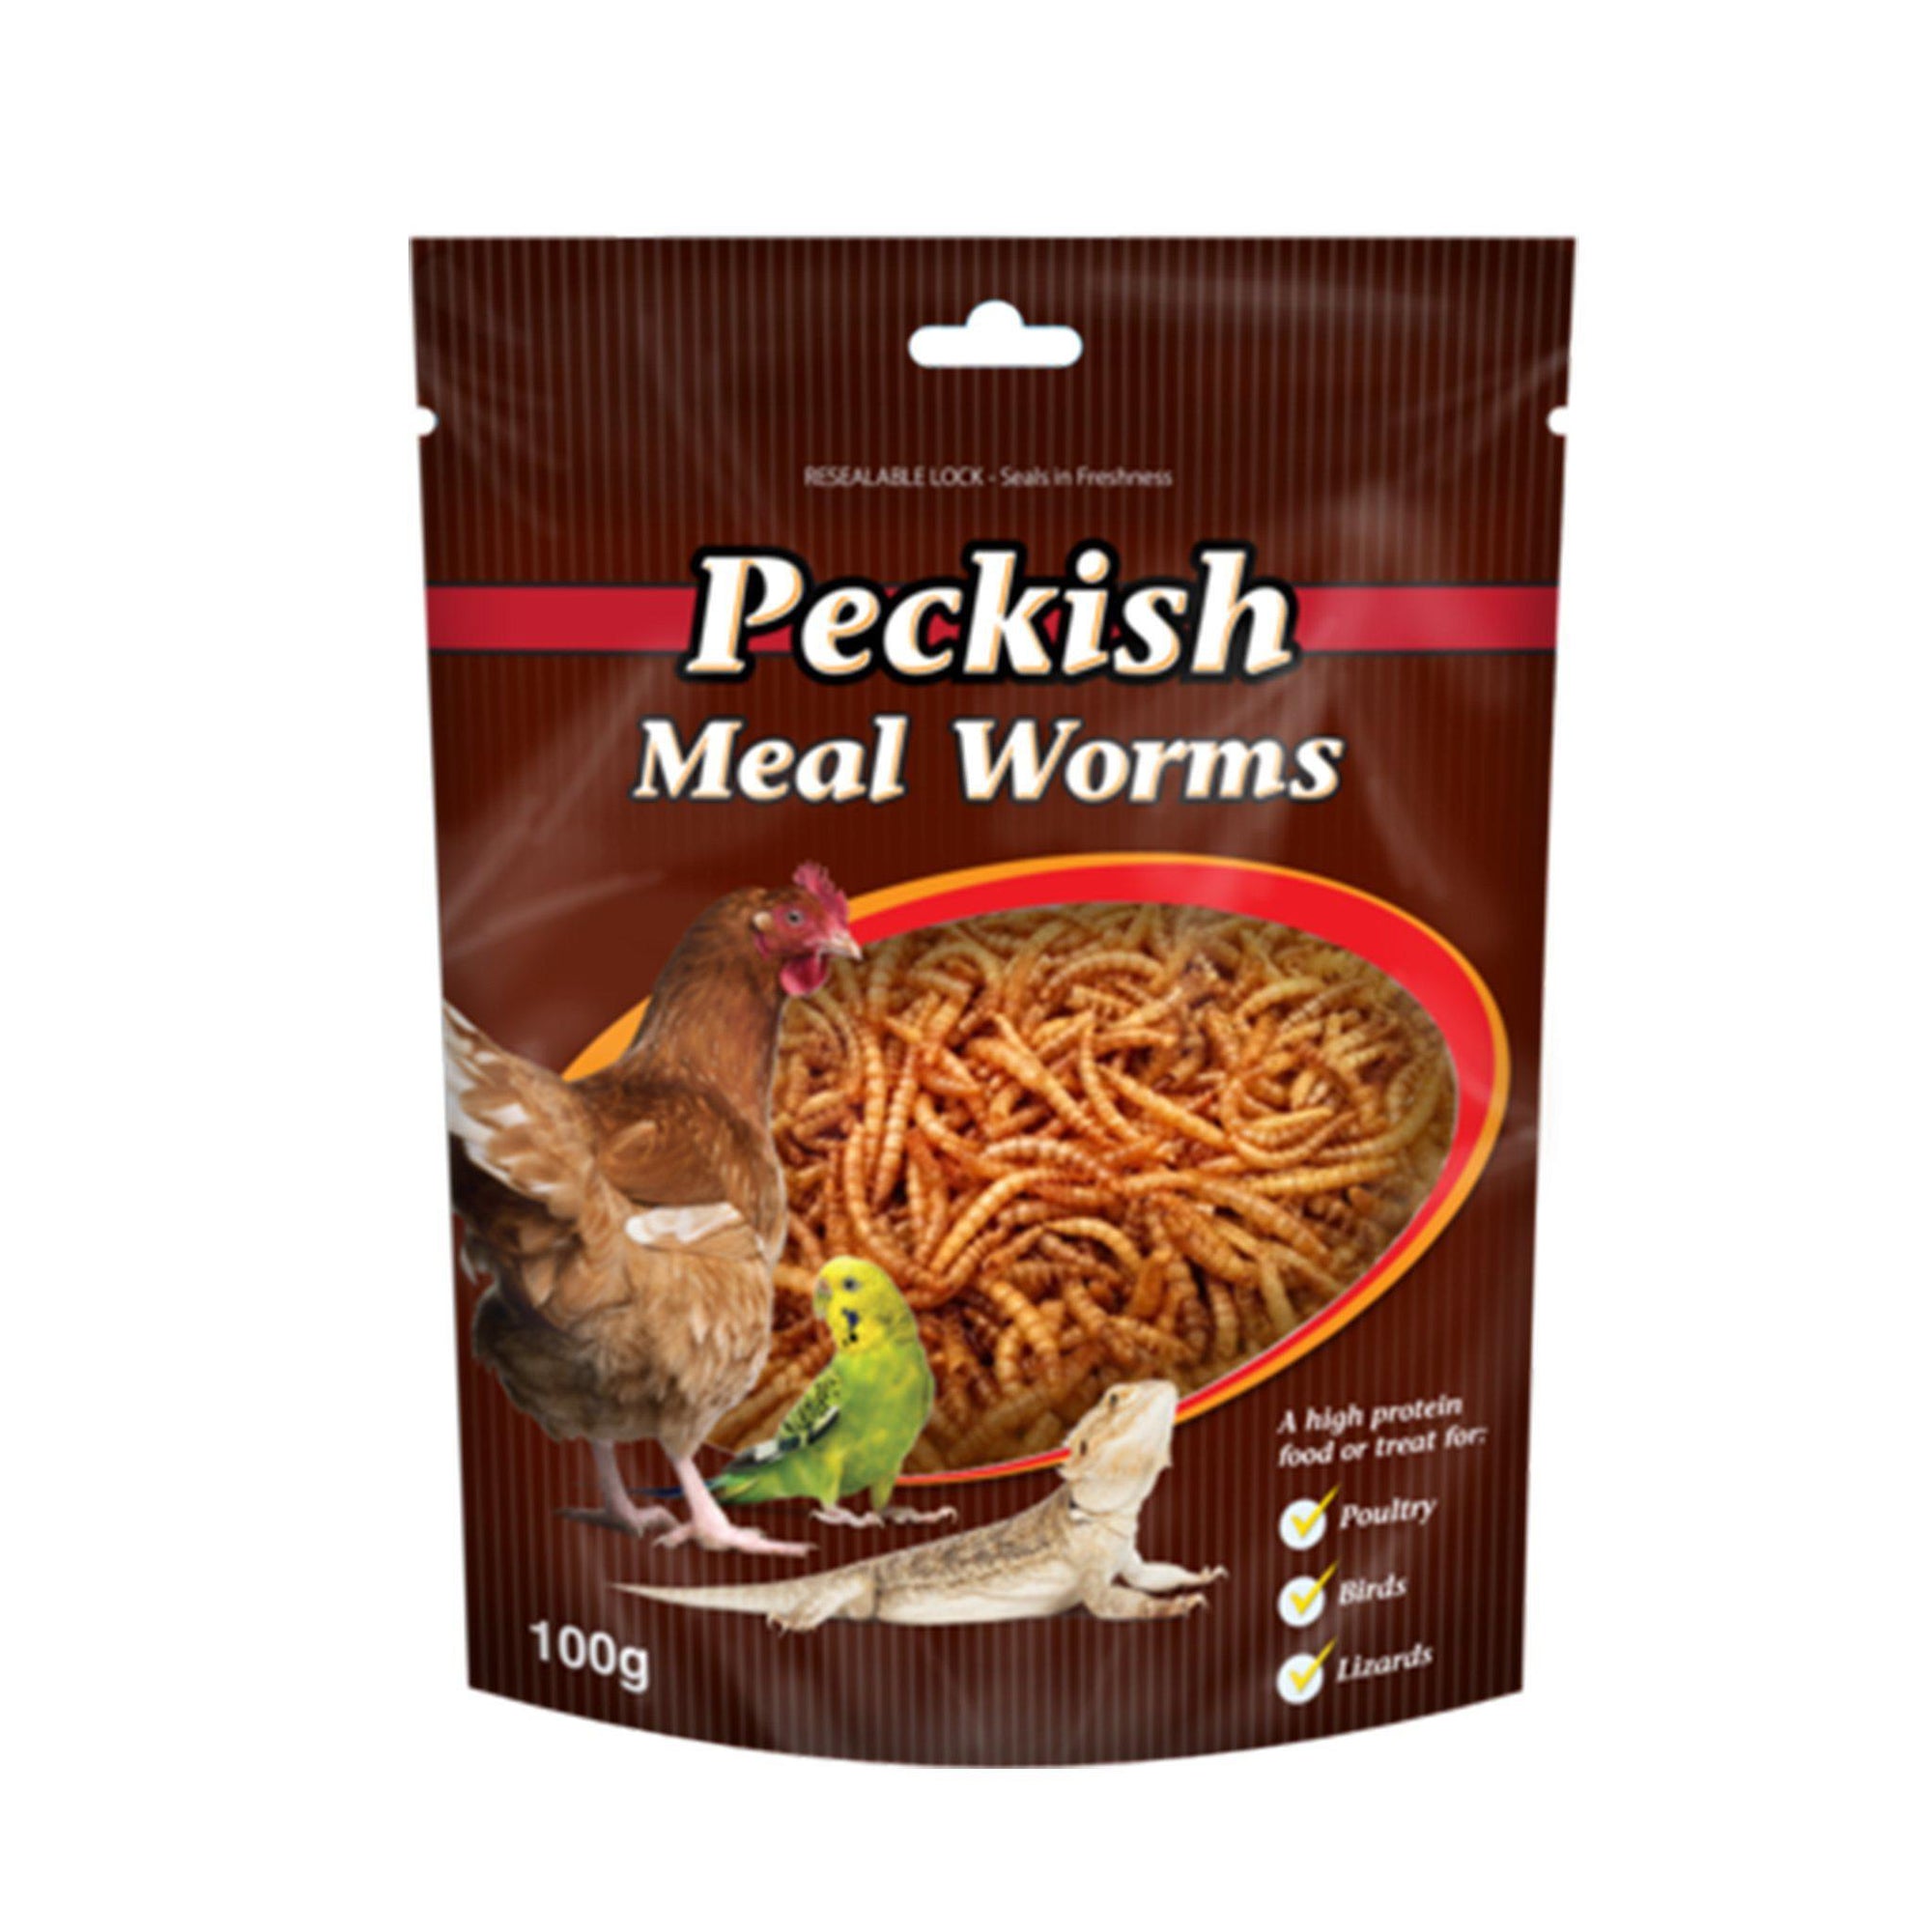 Peckish Mealworms 100g Bag - ComfyPet Products